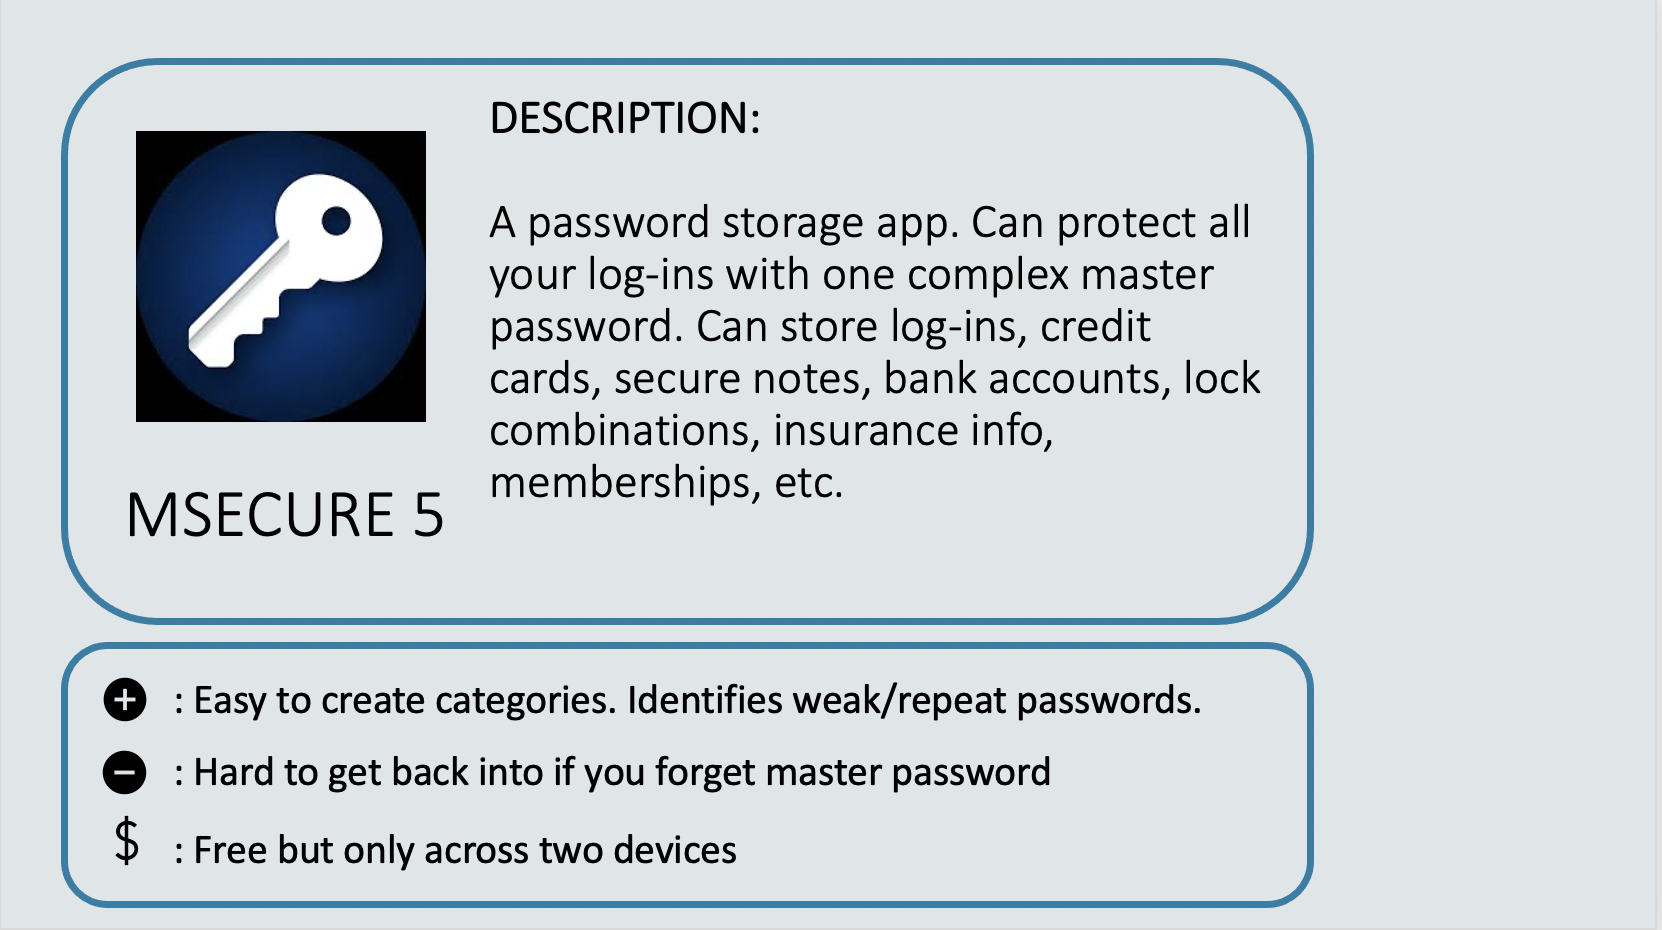 MSECURE 5 - A password storage app. Can protect all your log-ins with one complex master password. Can store log-ins, credit cards, secure notes, bank accounts, lock combinations, insurance info, memberships, etc. Positive: Easy to create categories. Identifies weak/repeat passwords. Negative: Hard to get back into if you forget master password. Cost: Free but only across two devices.